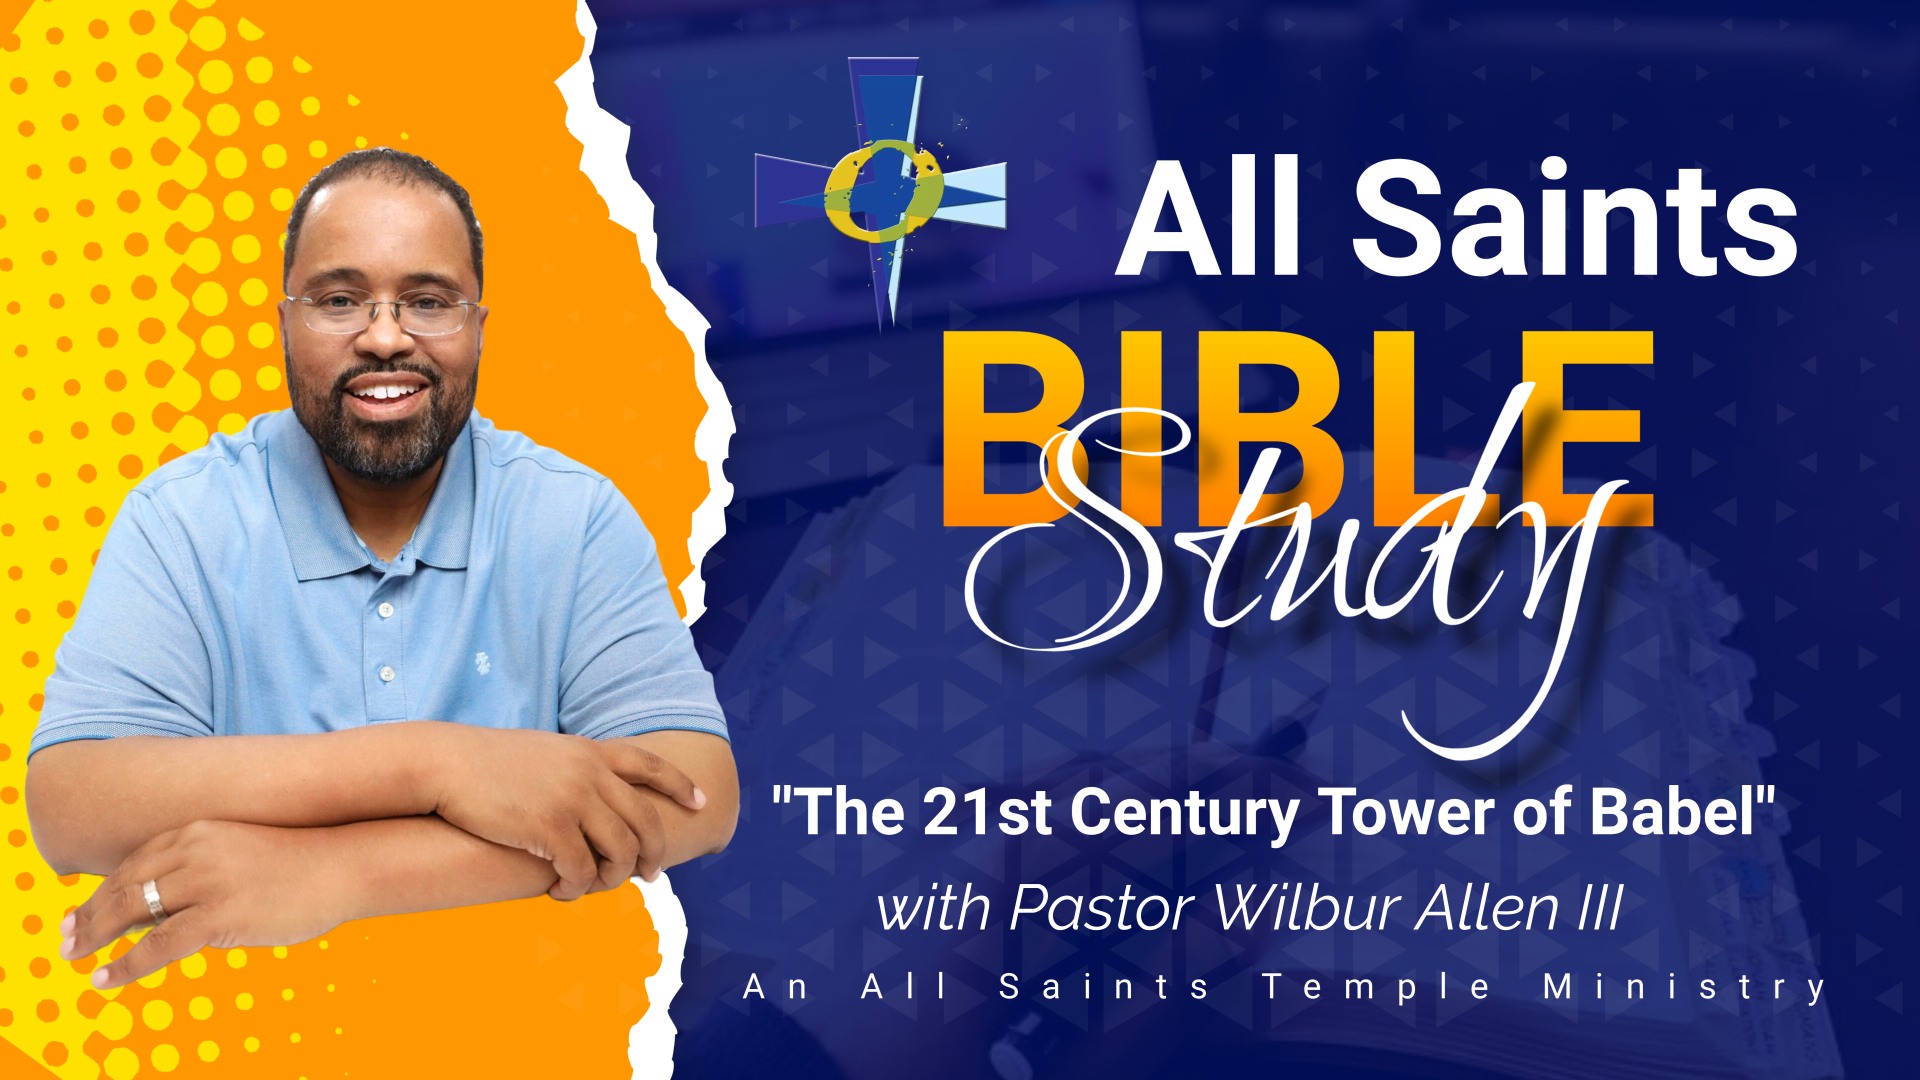 All Saints Bible Study - The 21st Century Tower of Babel